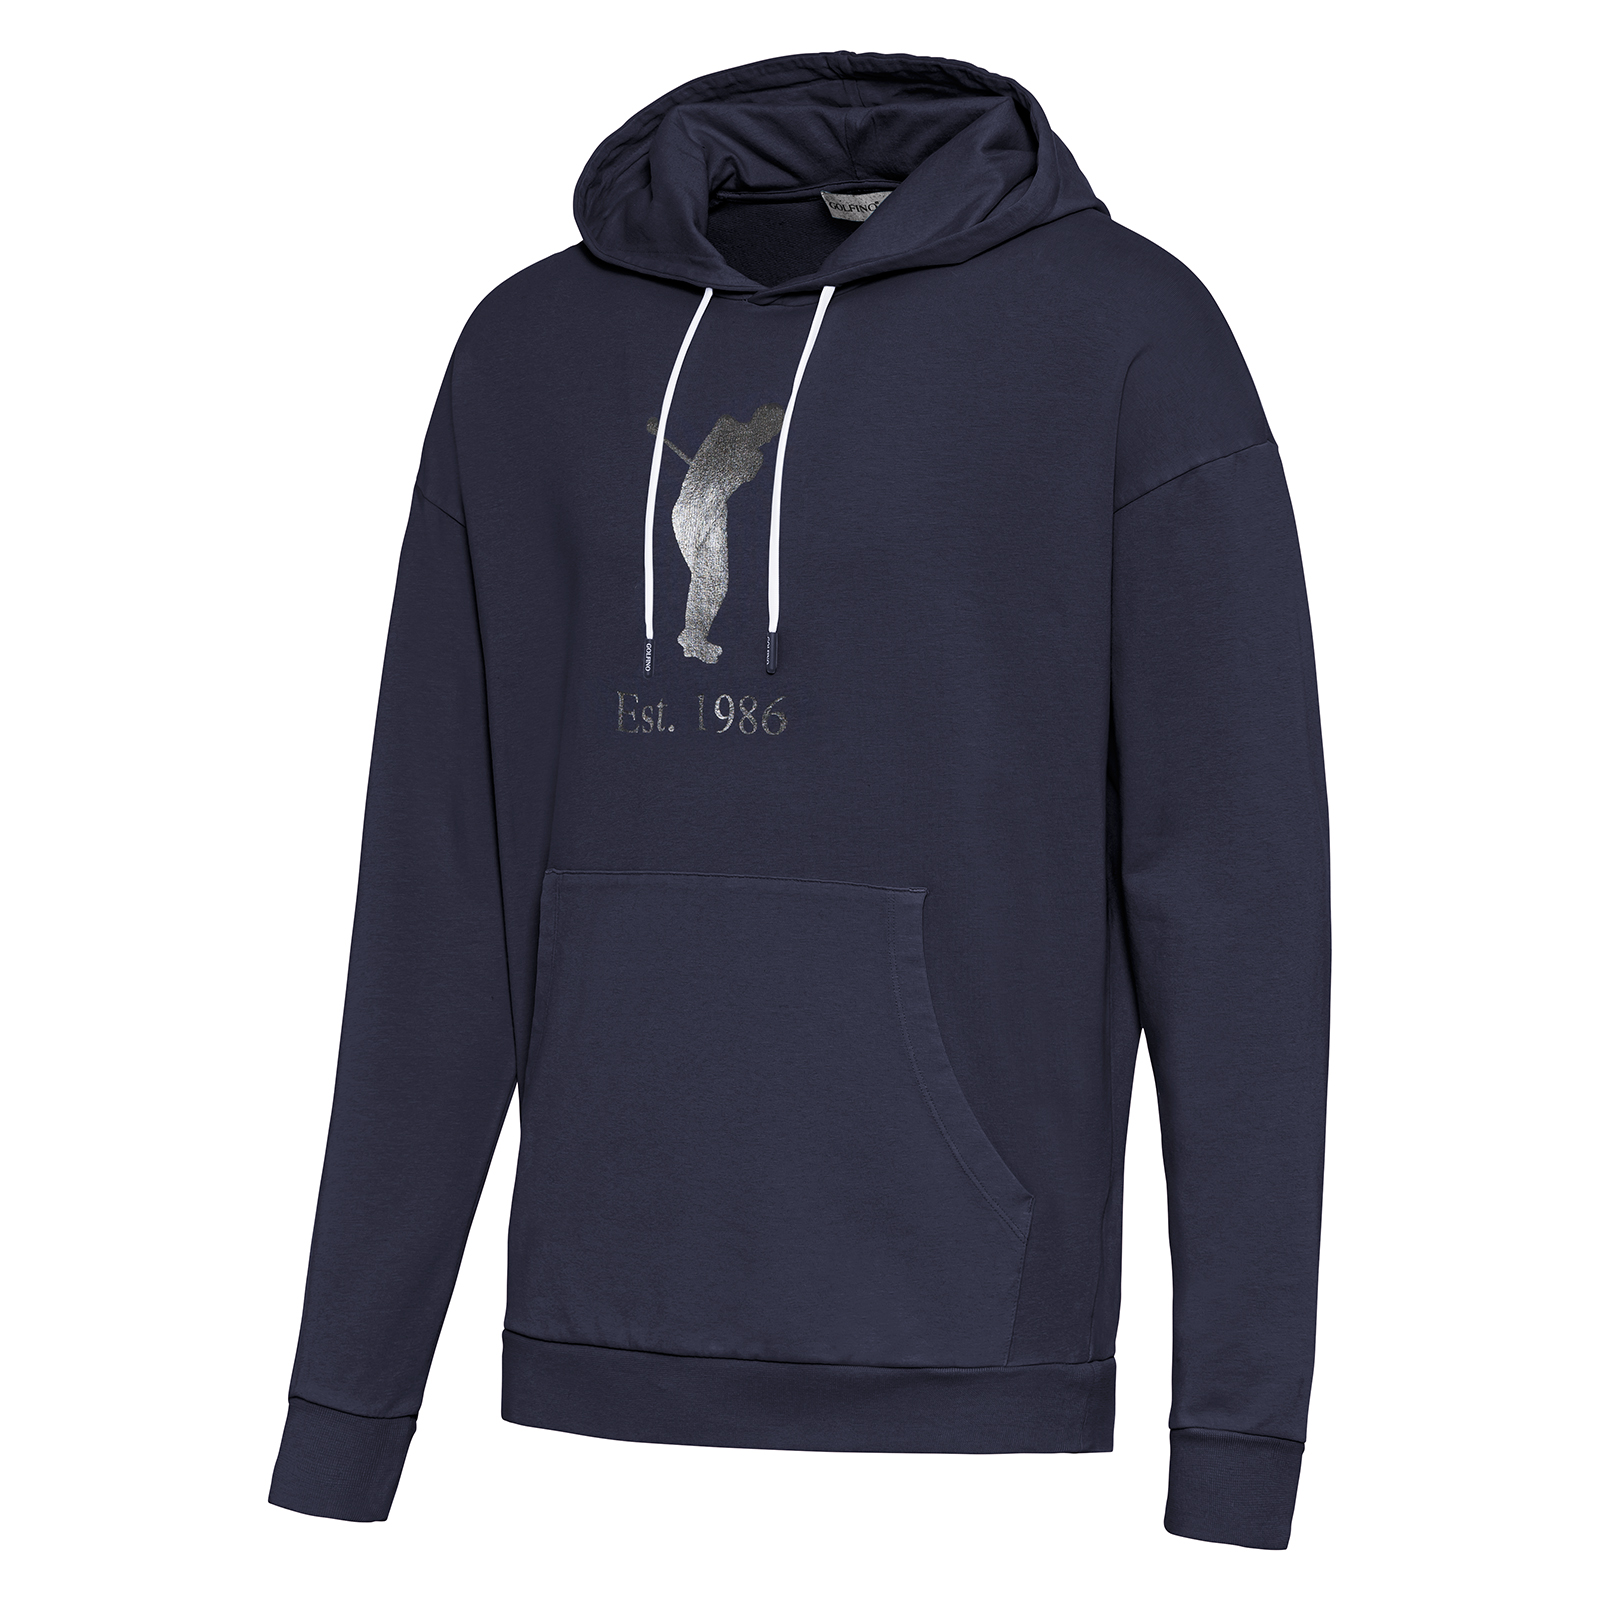 Men's sustainable, sporty sweater with hood